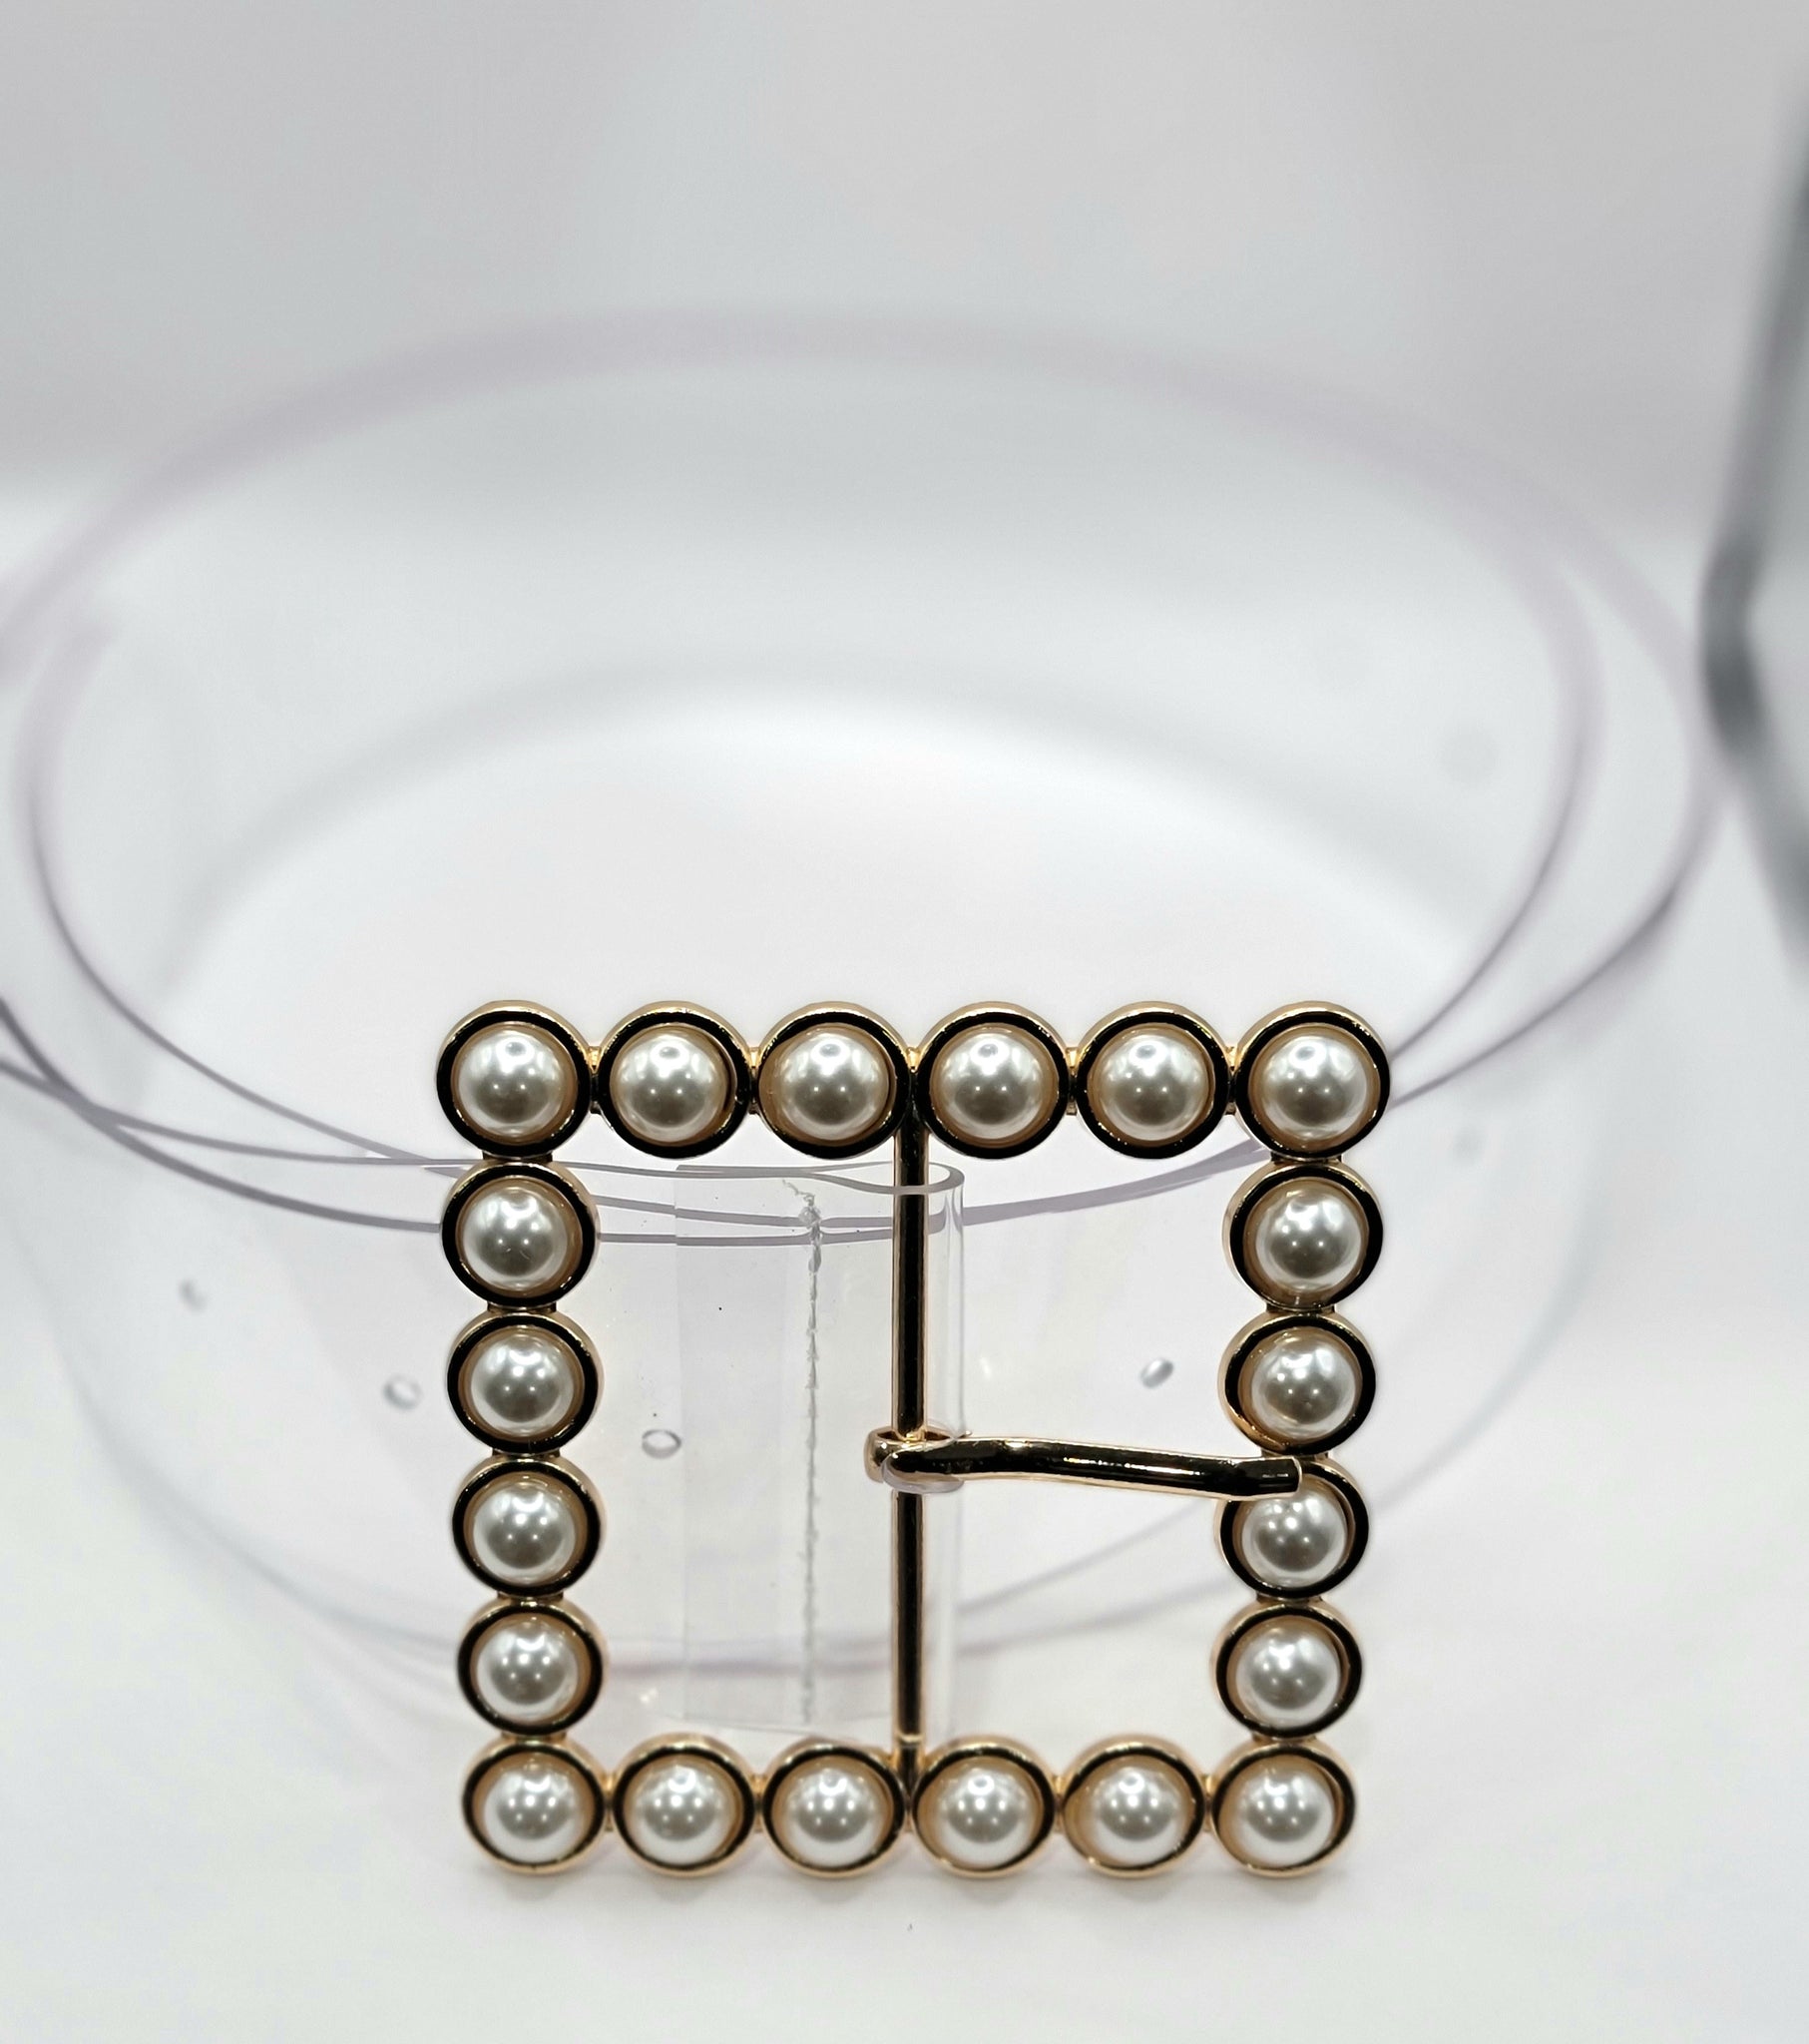 New Arrival!! So Cute Pearl Clear Belt – Thick Chicks_Boutique